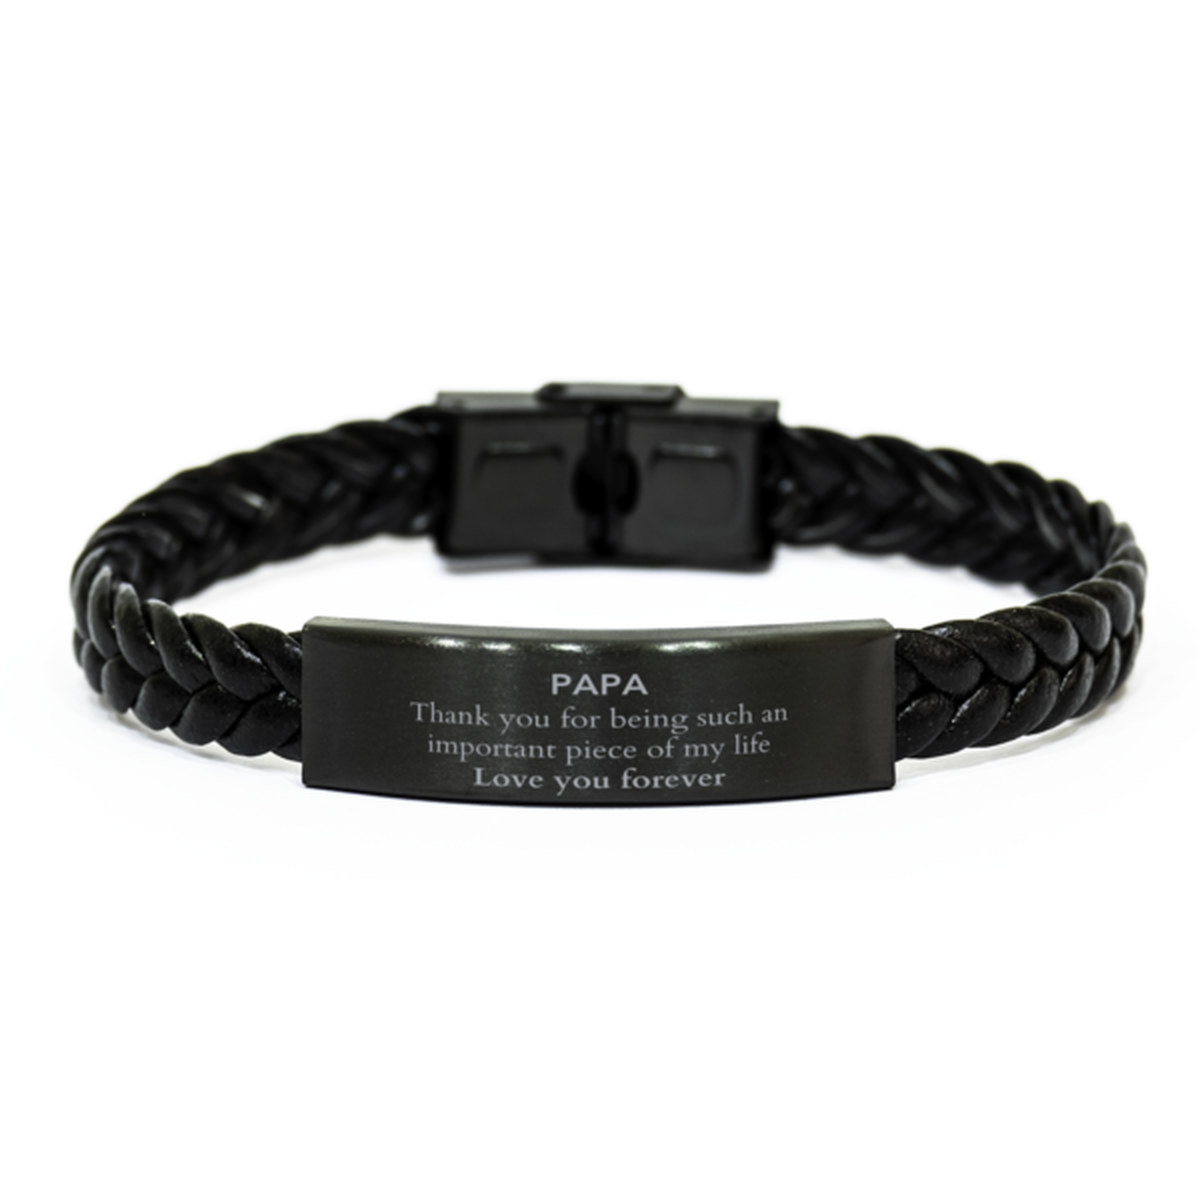 Appropriate Papa Braided Leather Bracelet Epic Birthday Gifts for Papa Thank you for being such an important piece of my life Papa Christmas Mothers Fathers Day